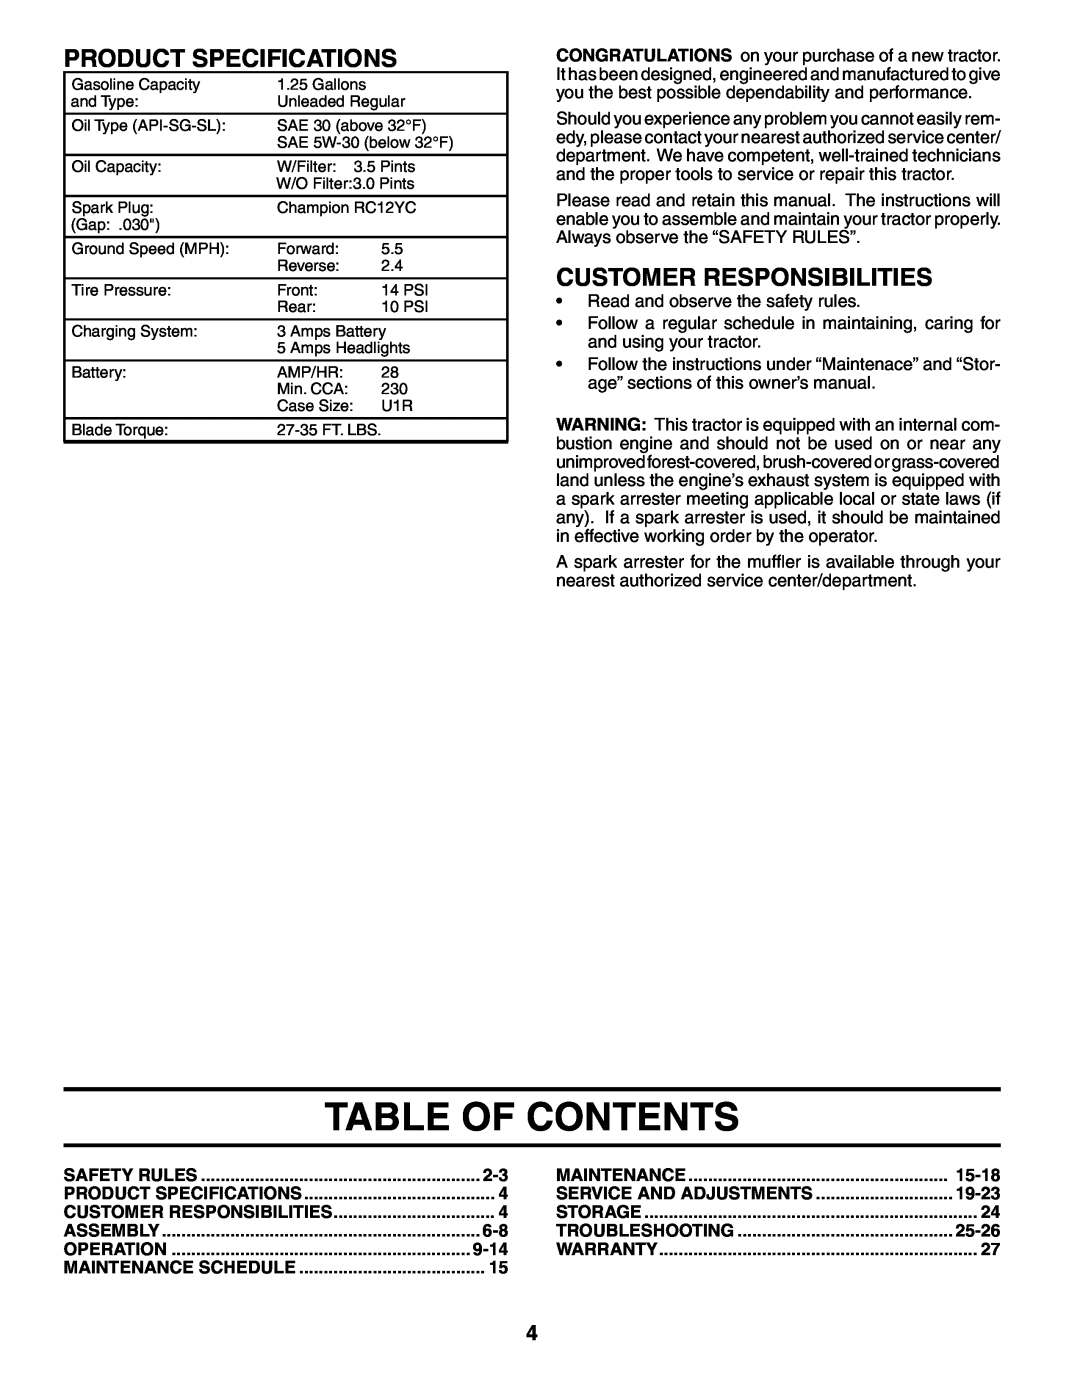 Poulan 194563 manual Table Of Contents, Product Specifications, Customer Responsibilities, 9-14, 15-18, 19-23, 25-26 